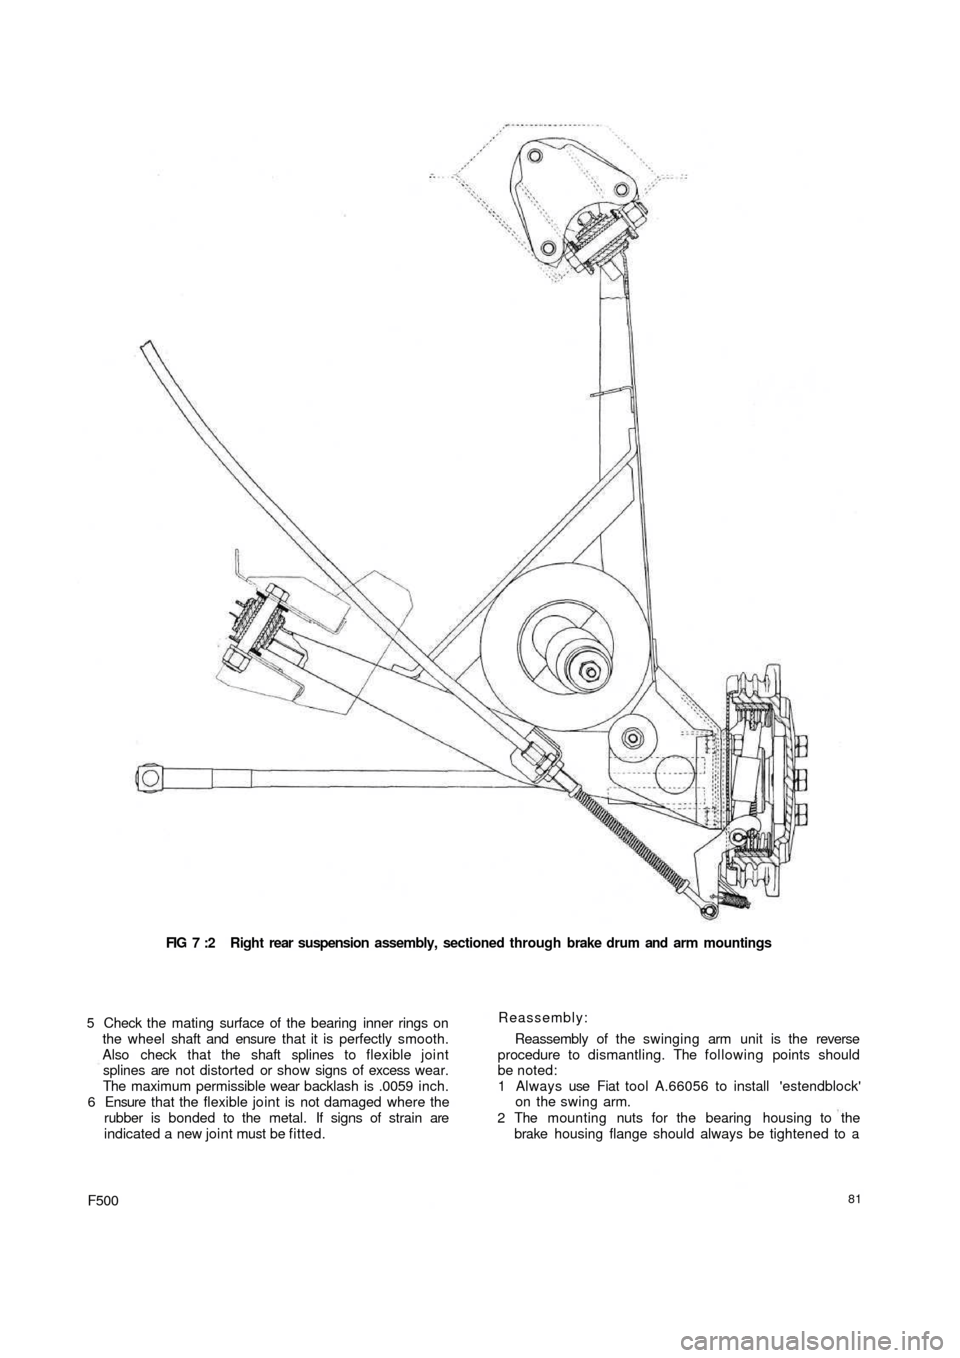 FIAT 500 1971 1.G Service Manual FIG 7 :2  Right rear suspension  assembly, sectioned through brake drum and arm mountings
5 Check the mating surface of the bearing inner rings on
the wheel shaft and ensure that it is perfectly smoot